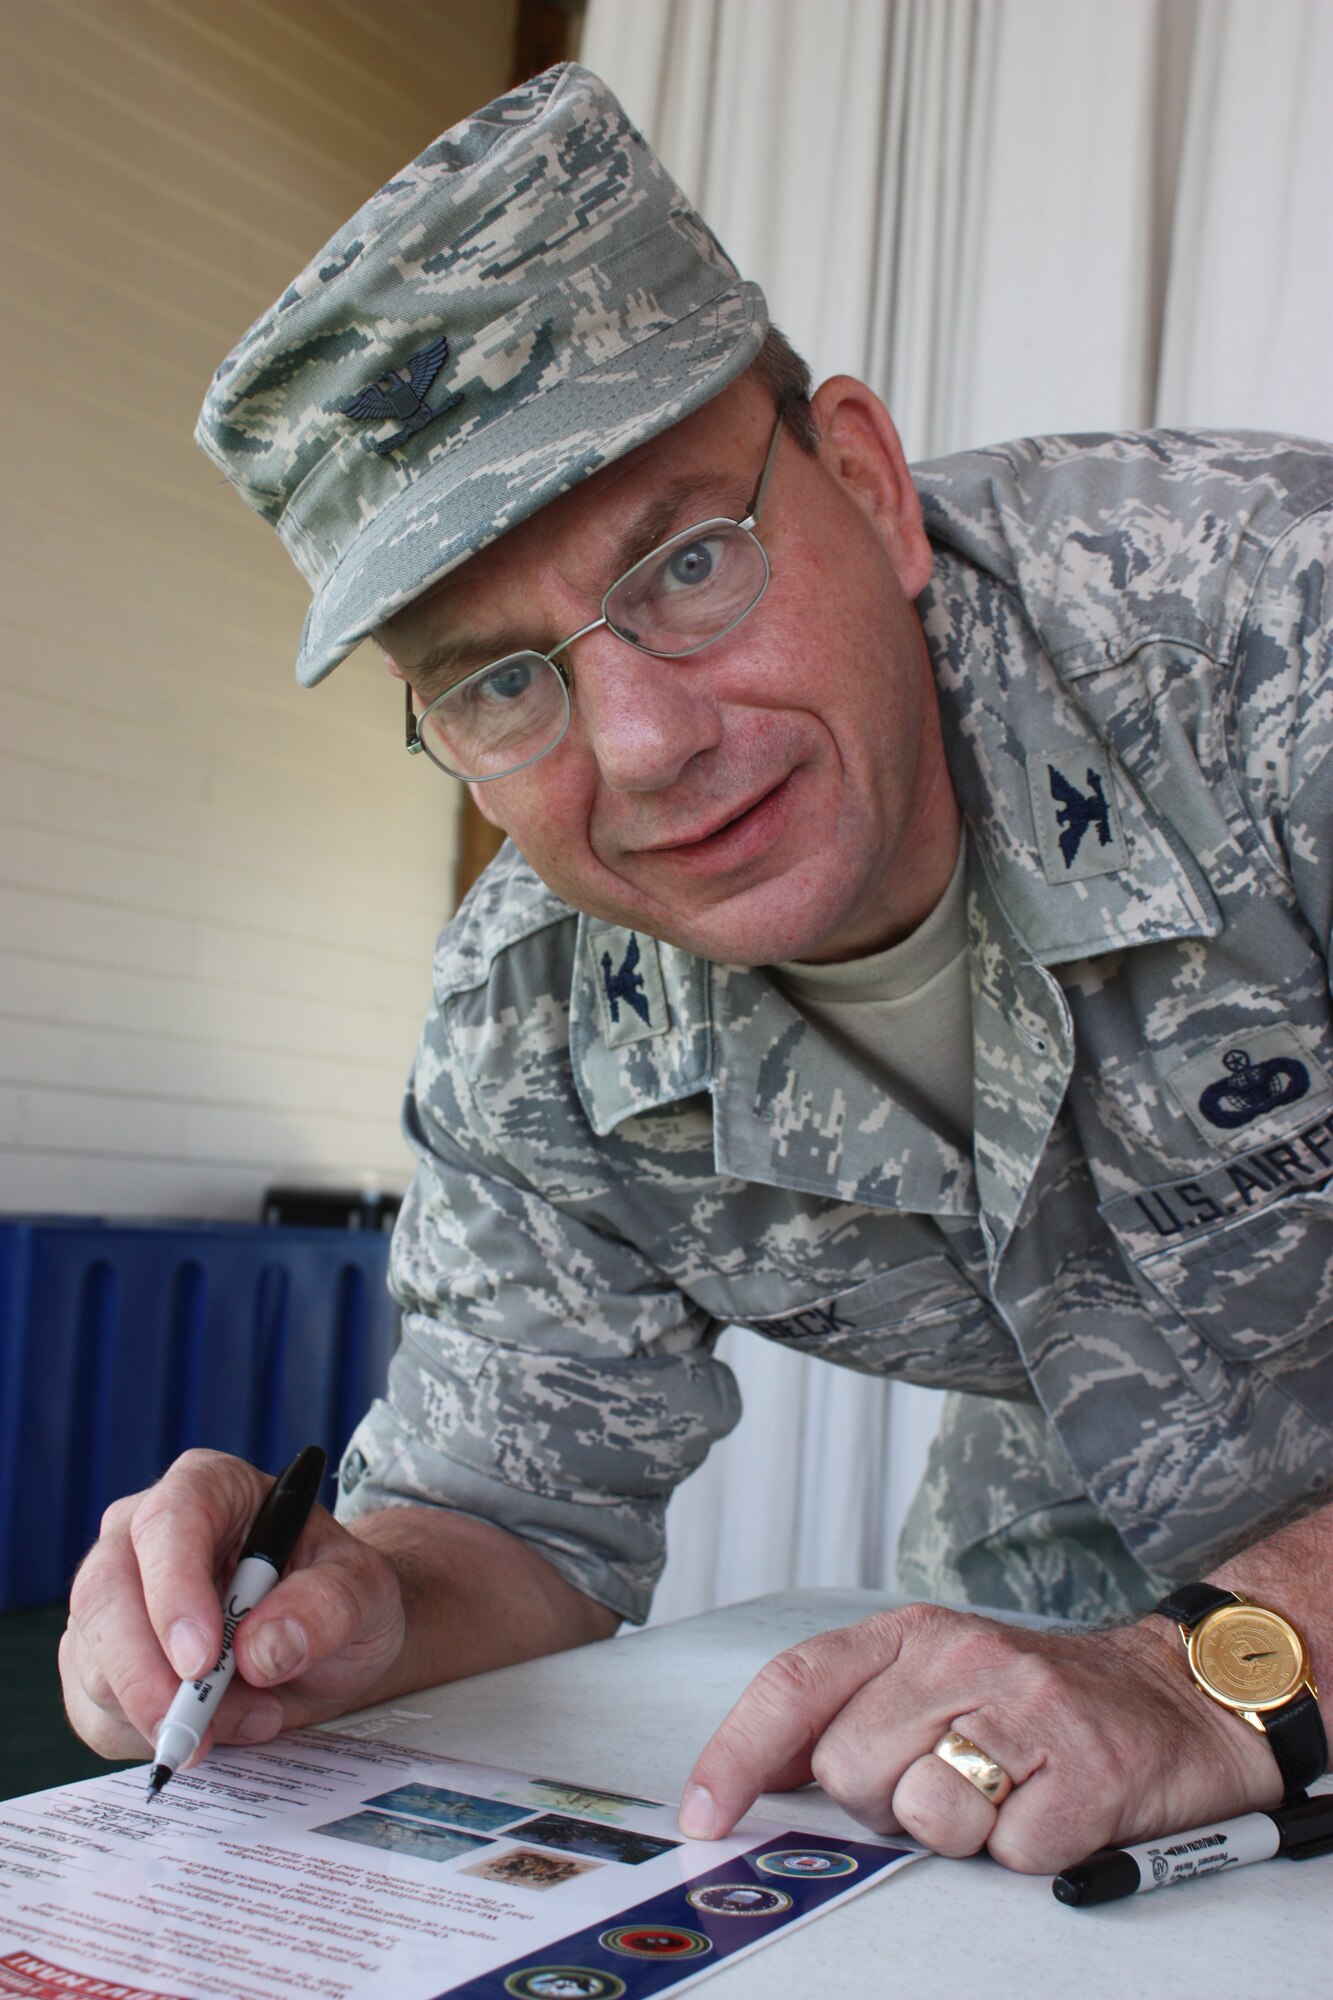 45th Mission Support Group Commander Col. Charles Beck took time April 25 to proudly sign the Brevard Armed Forces Covenant, signifying Brevard County's commitment to supporting members of the Armed Forces and their families, at Wickham Park during the  22nd Annual Vietnam and All Veterans Reunion. "A lot of people thank me for my service," Colonel Beck said to the gathered crowd, "but our veterans here today never stopped serving." (U.S. Air Force photo/Airman 1st Class David Dobrydney)